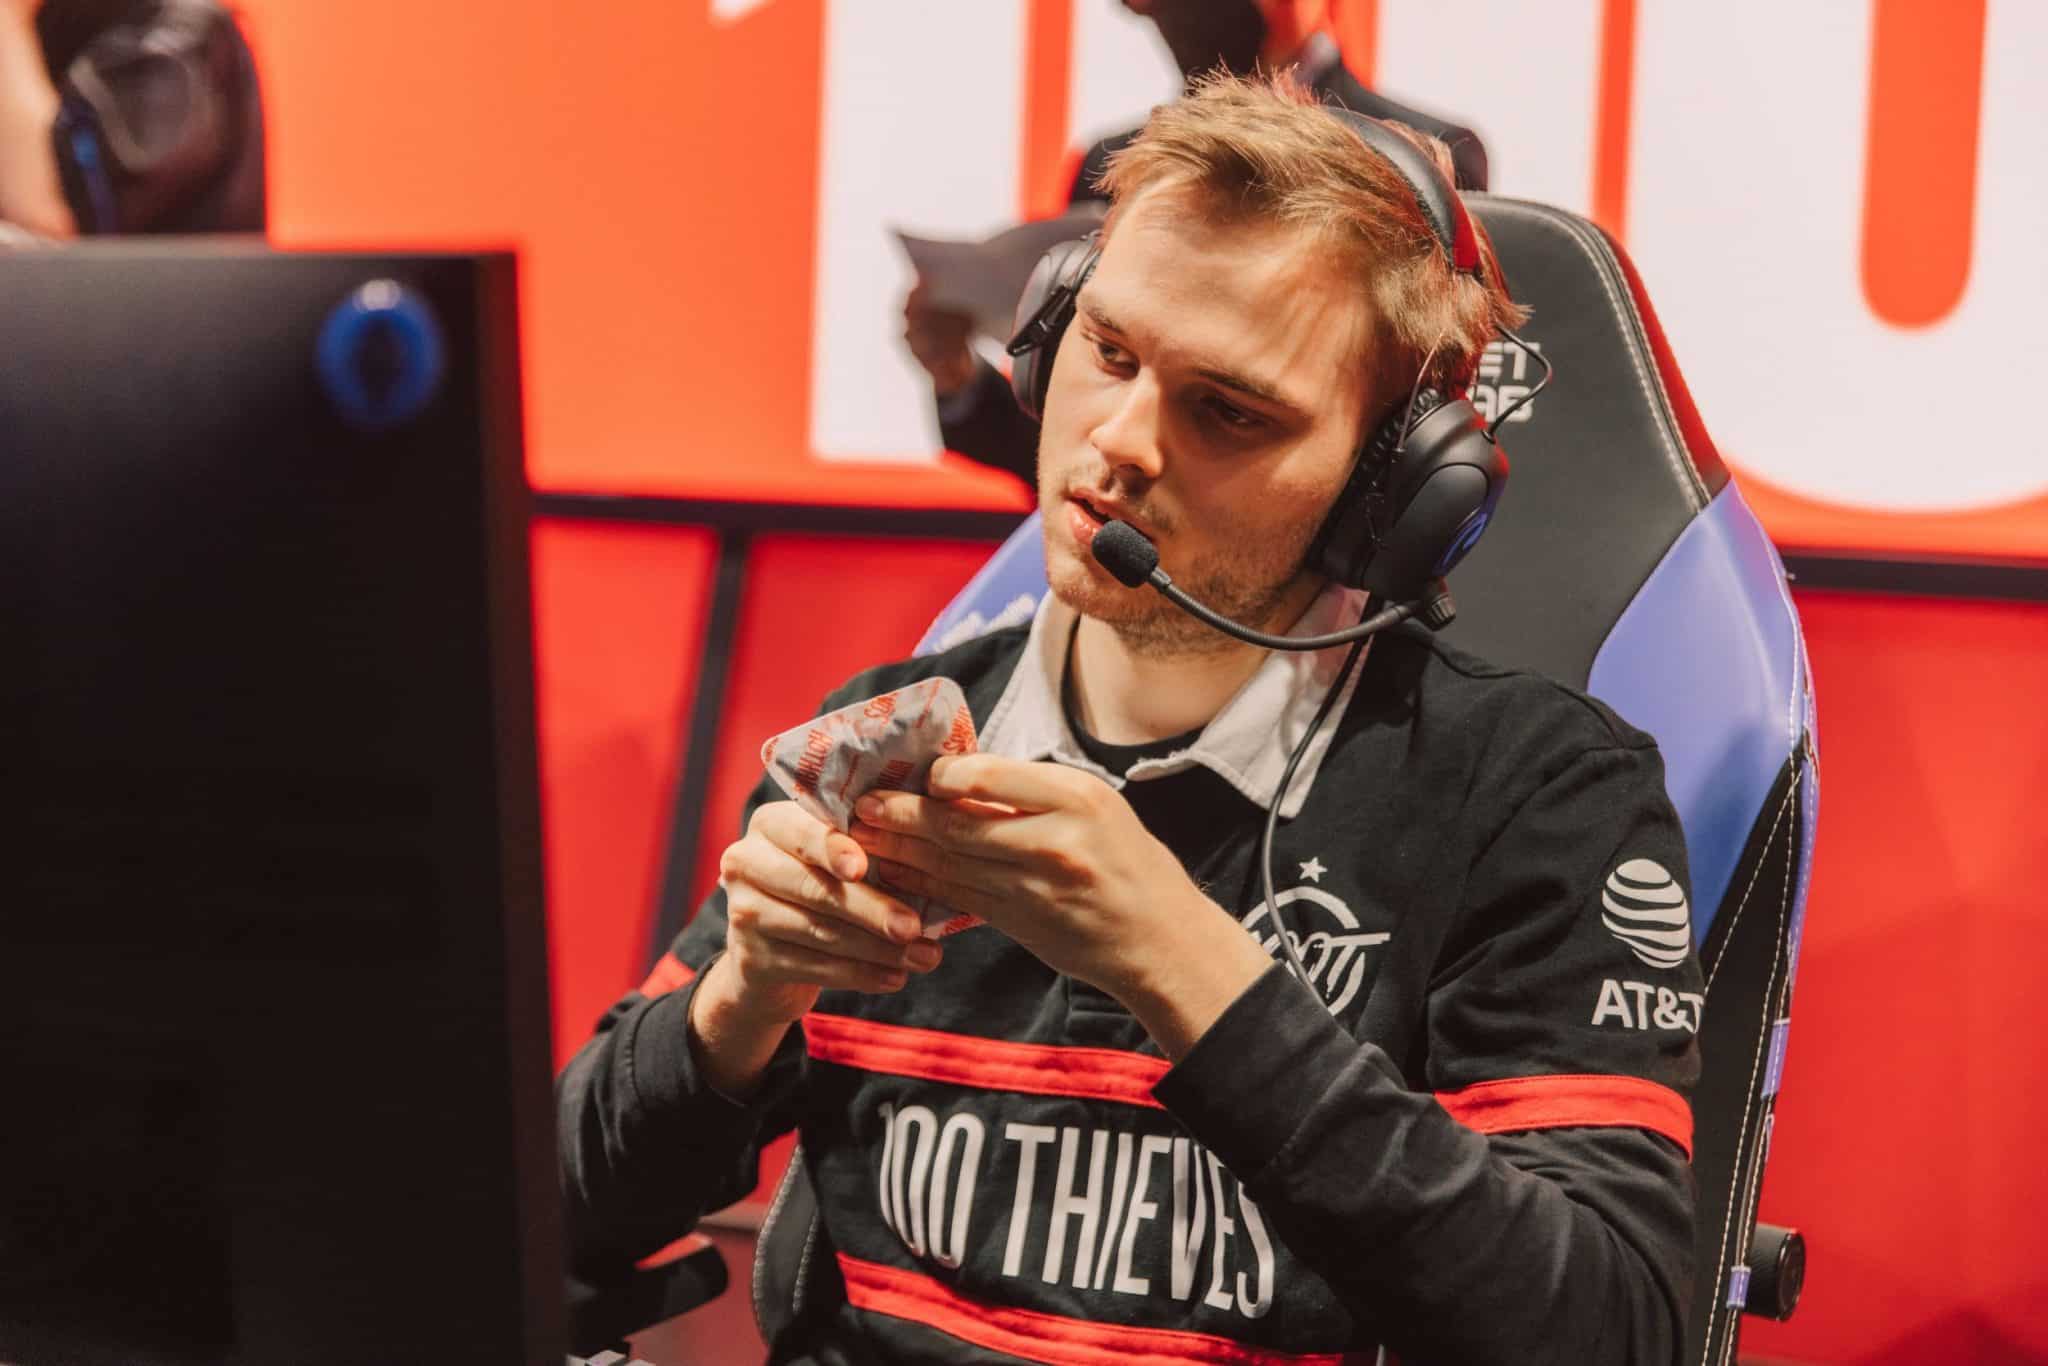 Abbedagge tilting head while playing League of Legends for 100 Thieves in LCS 2022